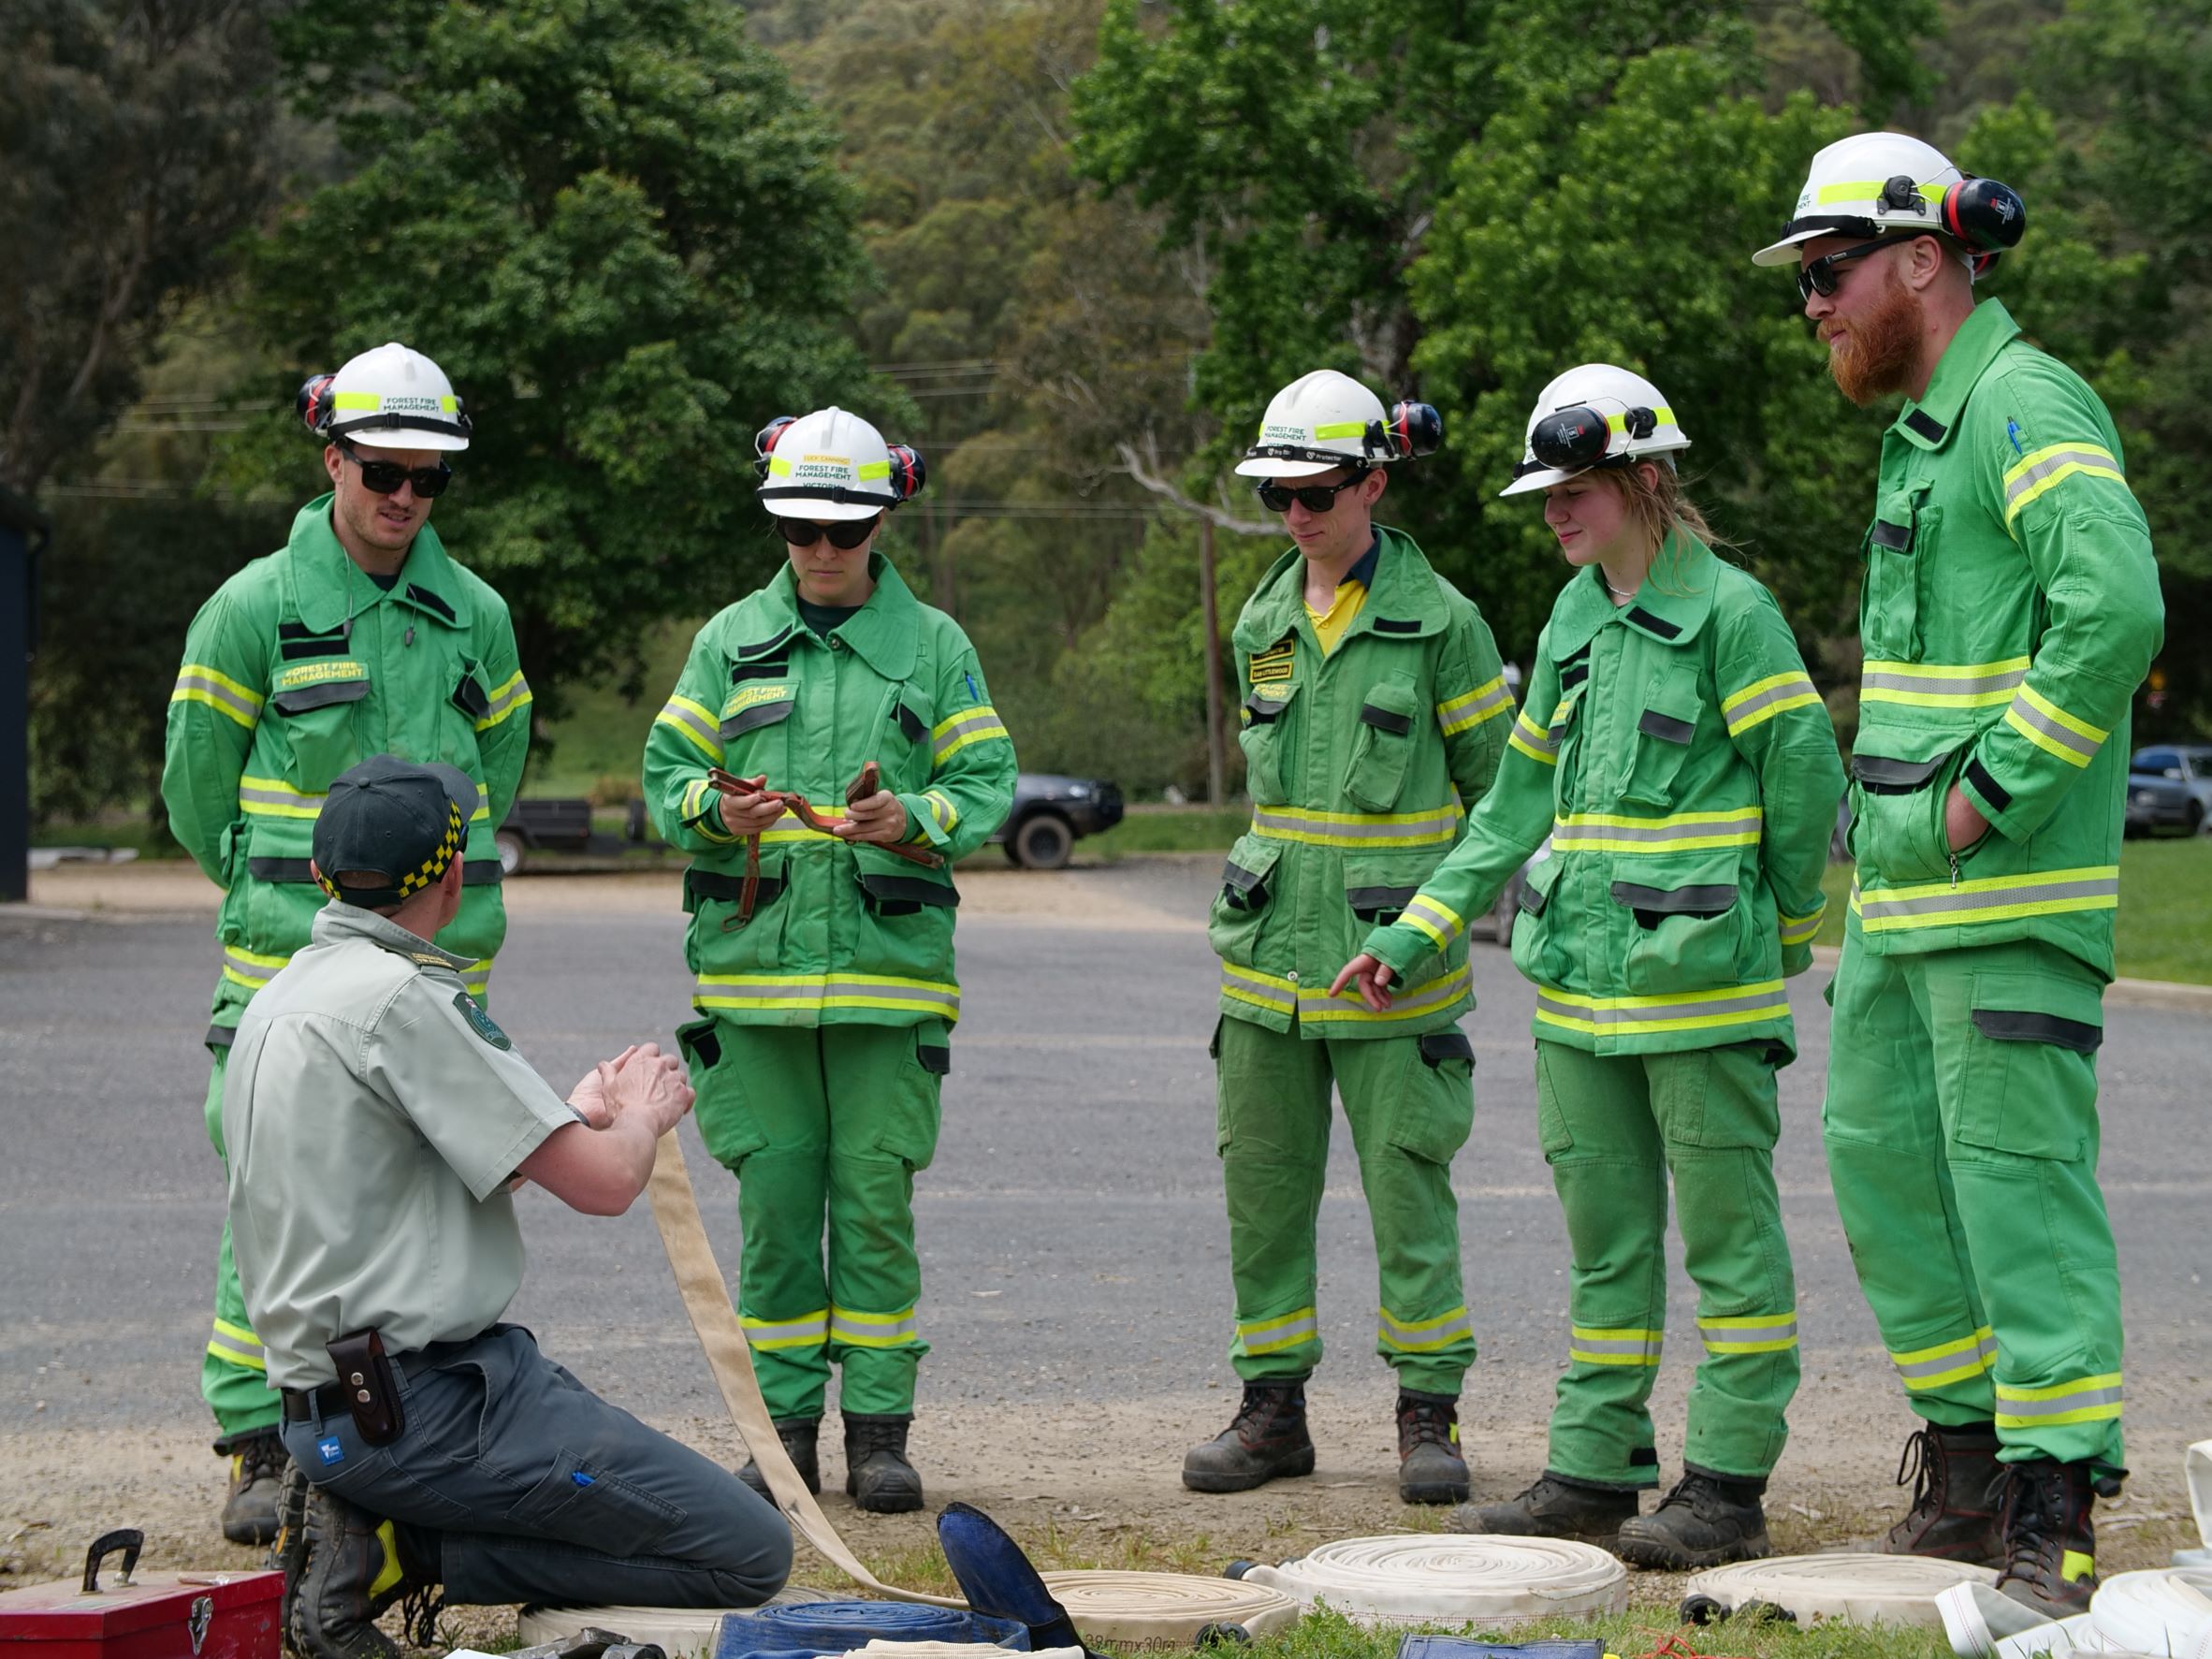 Five new FFMVic recruits at training.